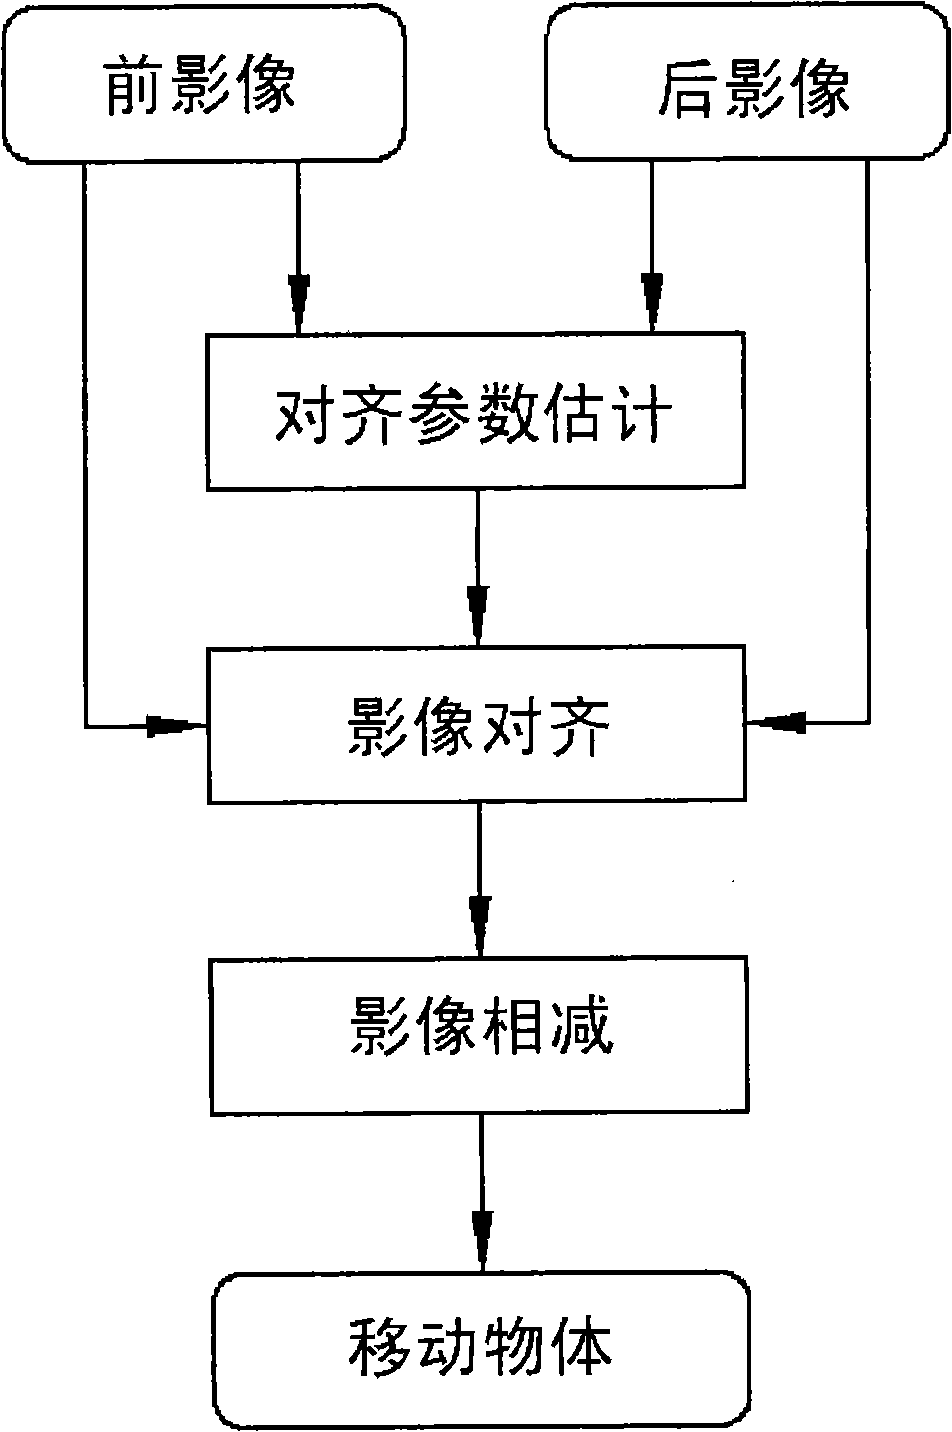 Moving object detecting apparatus and method using light track analysis